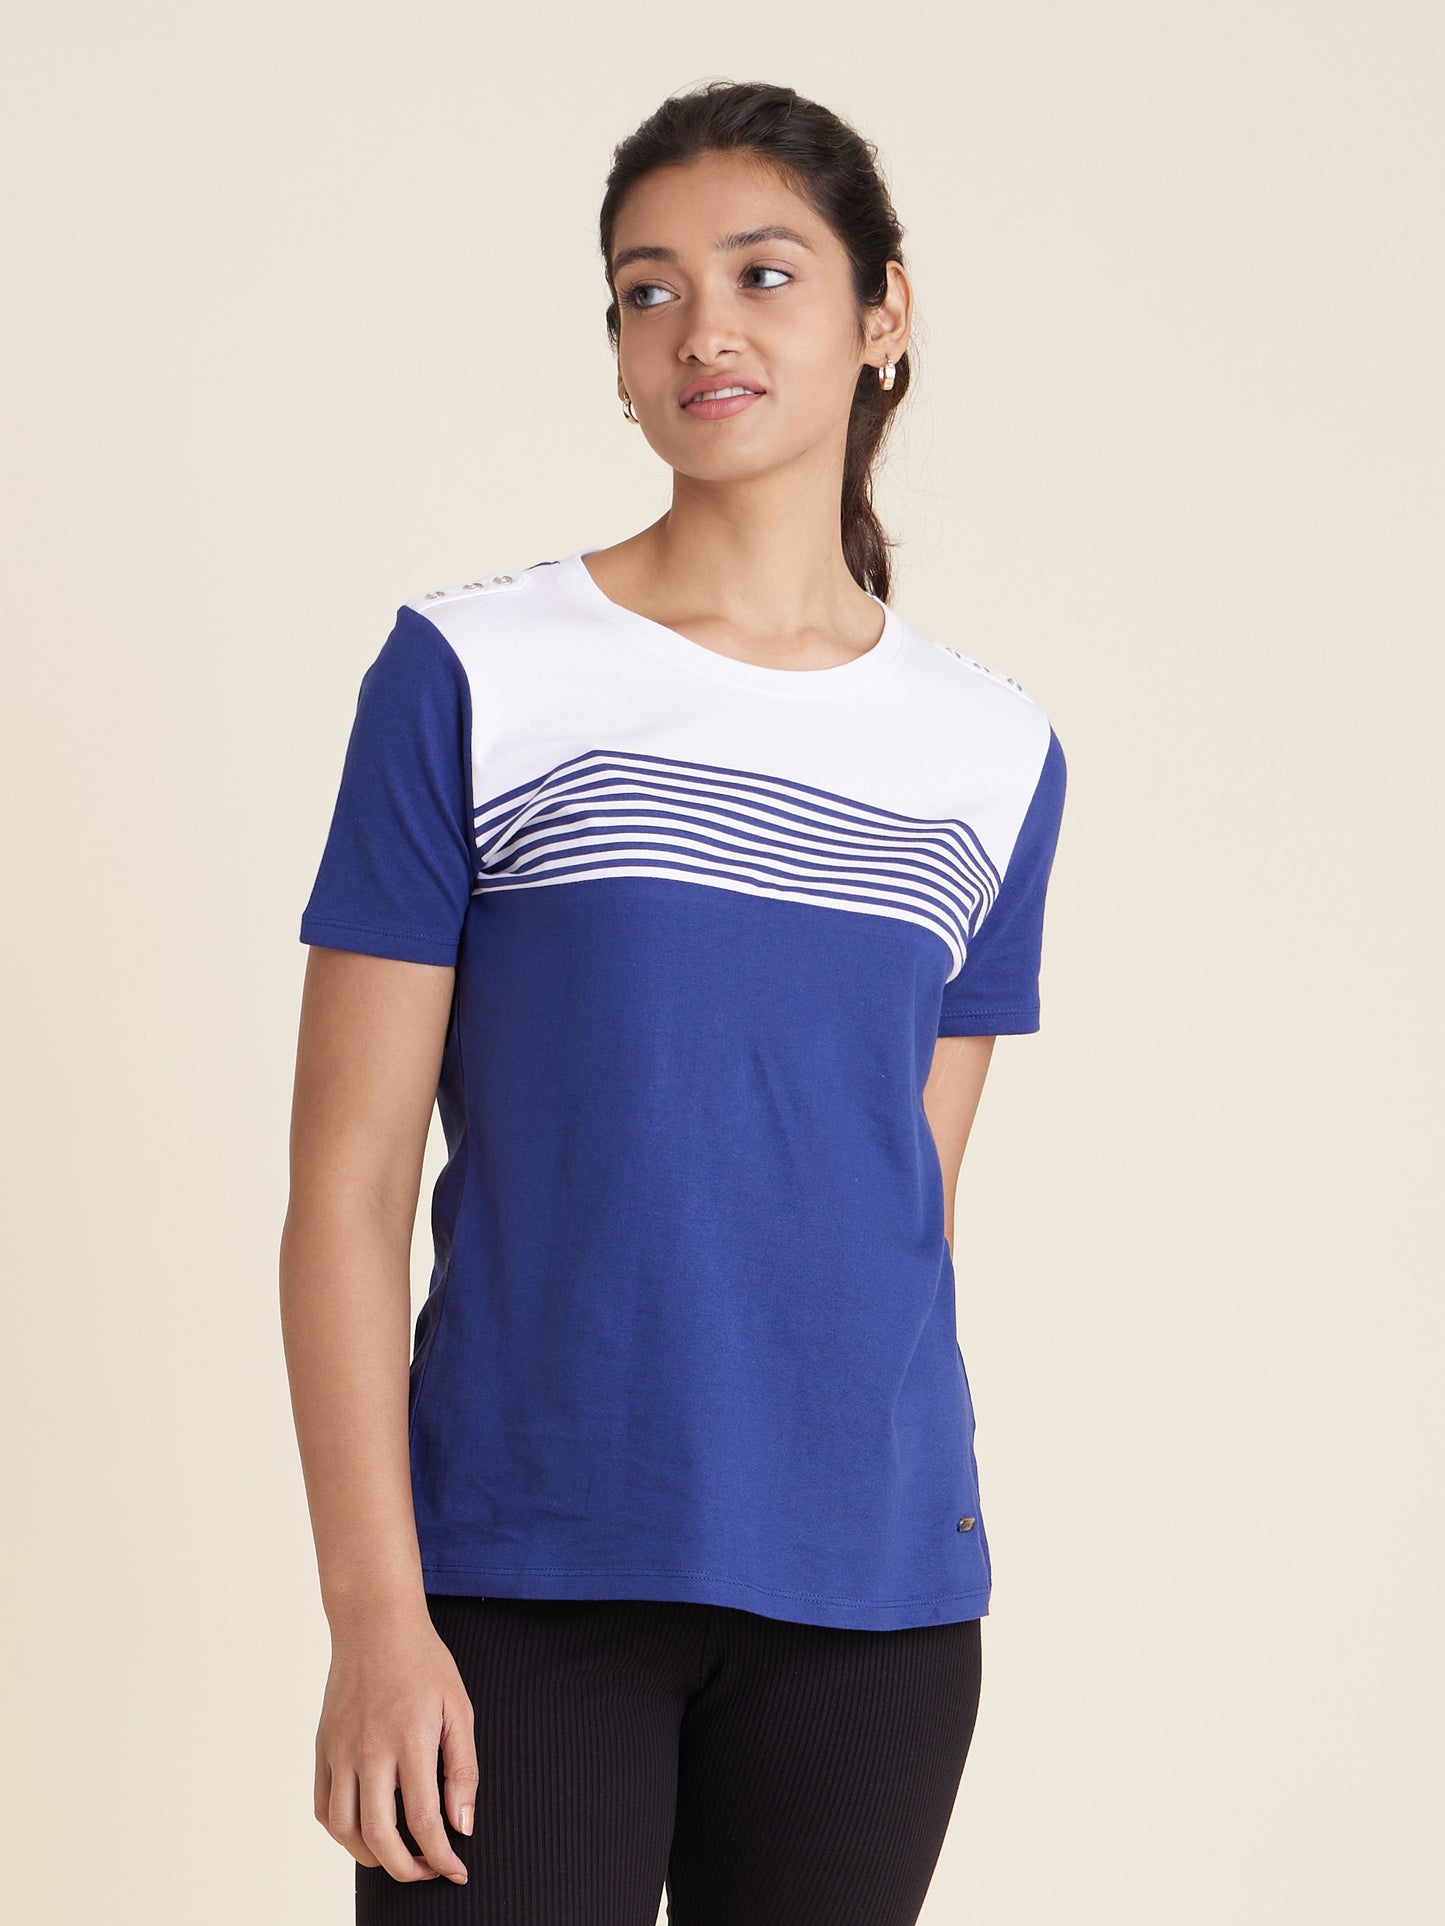 The Abbess Top Navy